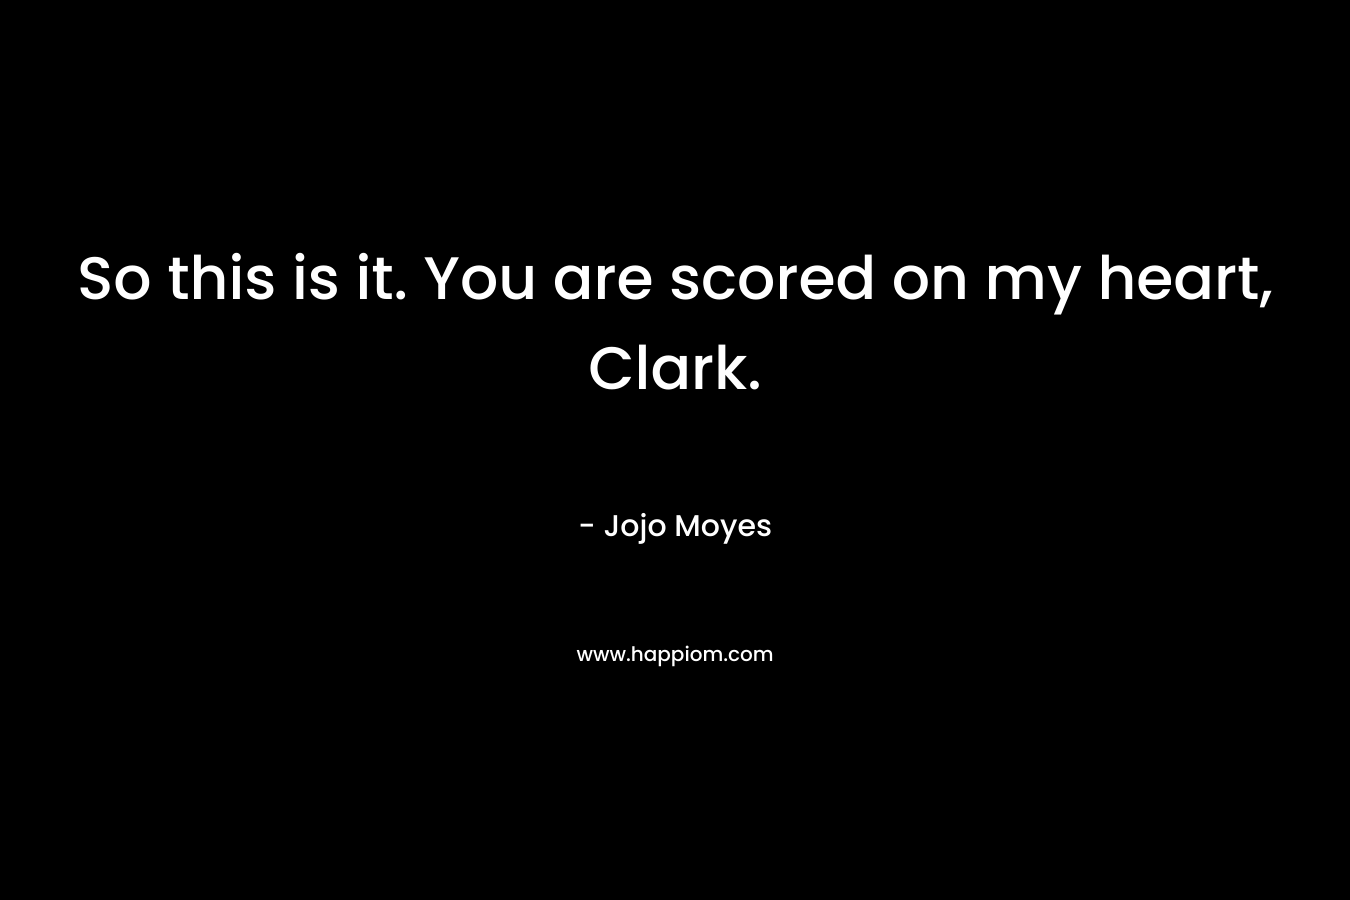 So this is it. You are scored on my heart, Clark. – Jojo Moyes